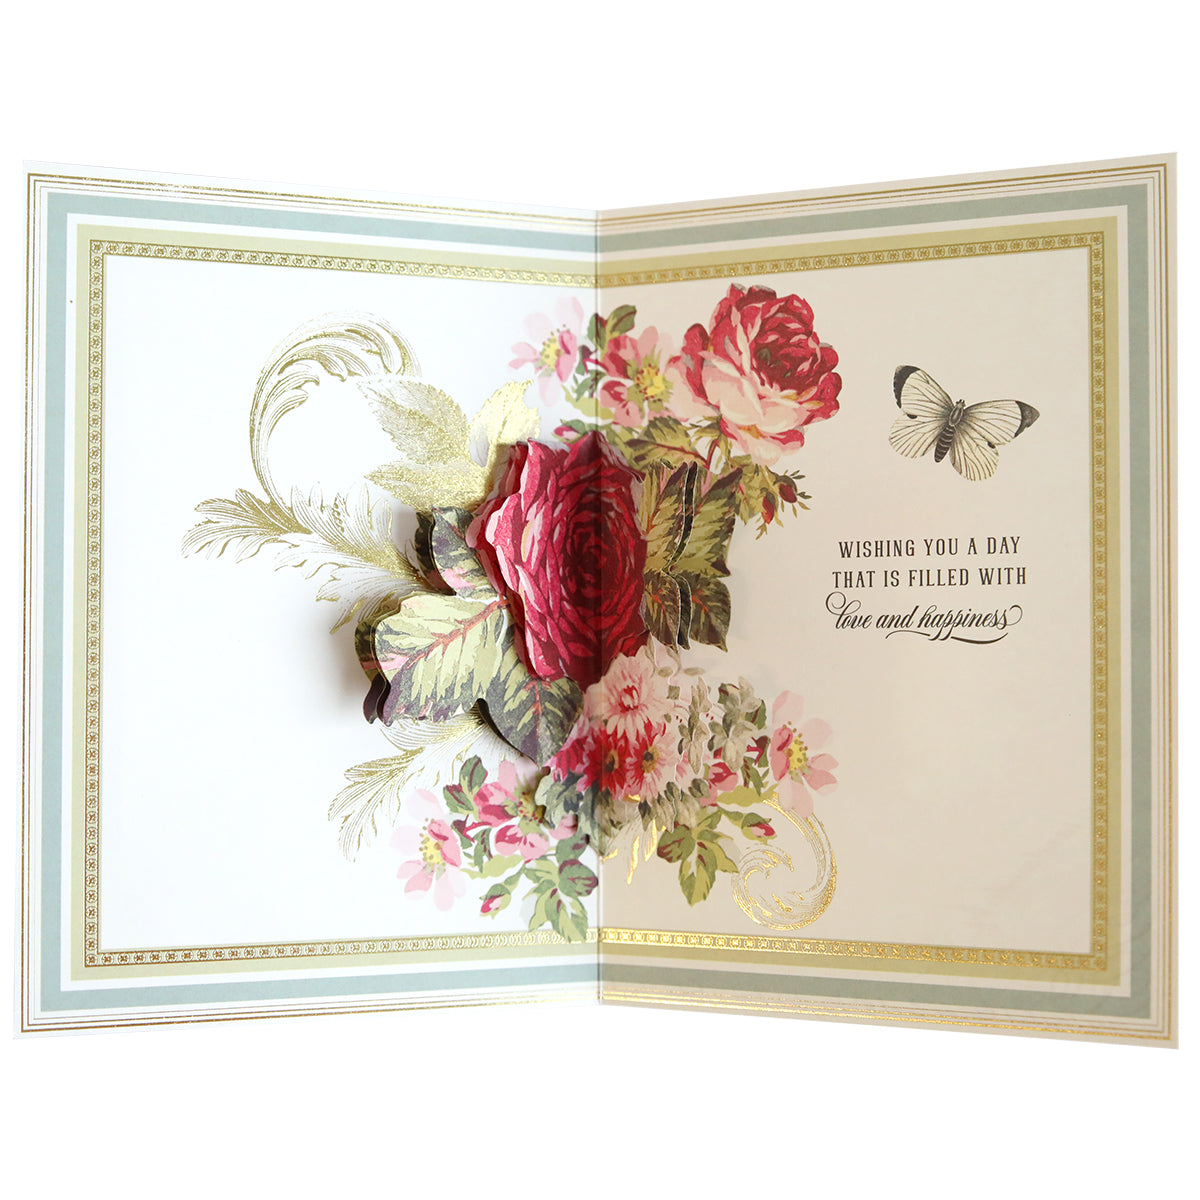 An open greeting card from the Folded Flower Birthday Card Kit featuring a 3D pop-up bouquet of red roses and feathers with the message "Wishing you a day that is filled with love and happiness.